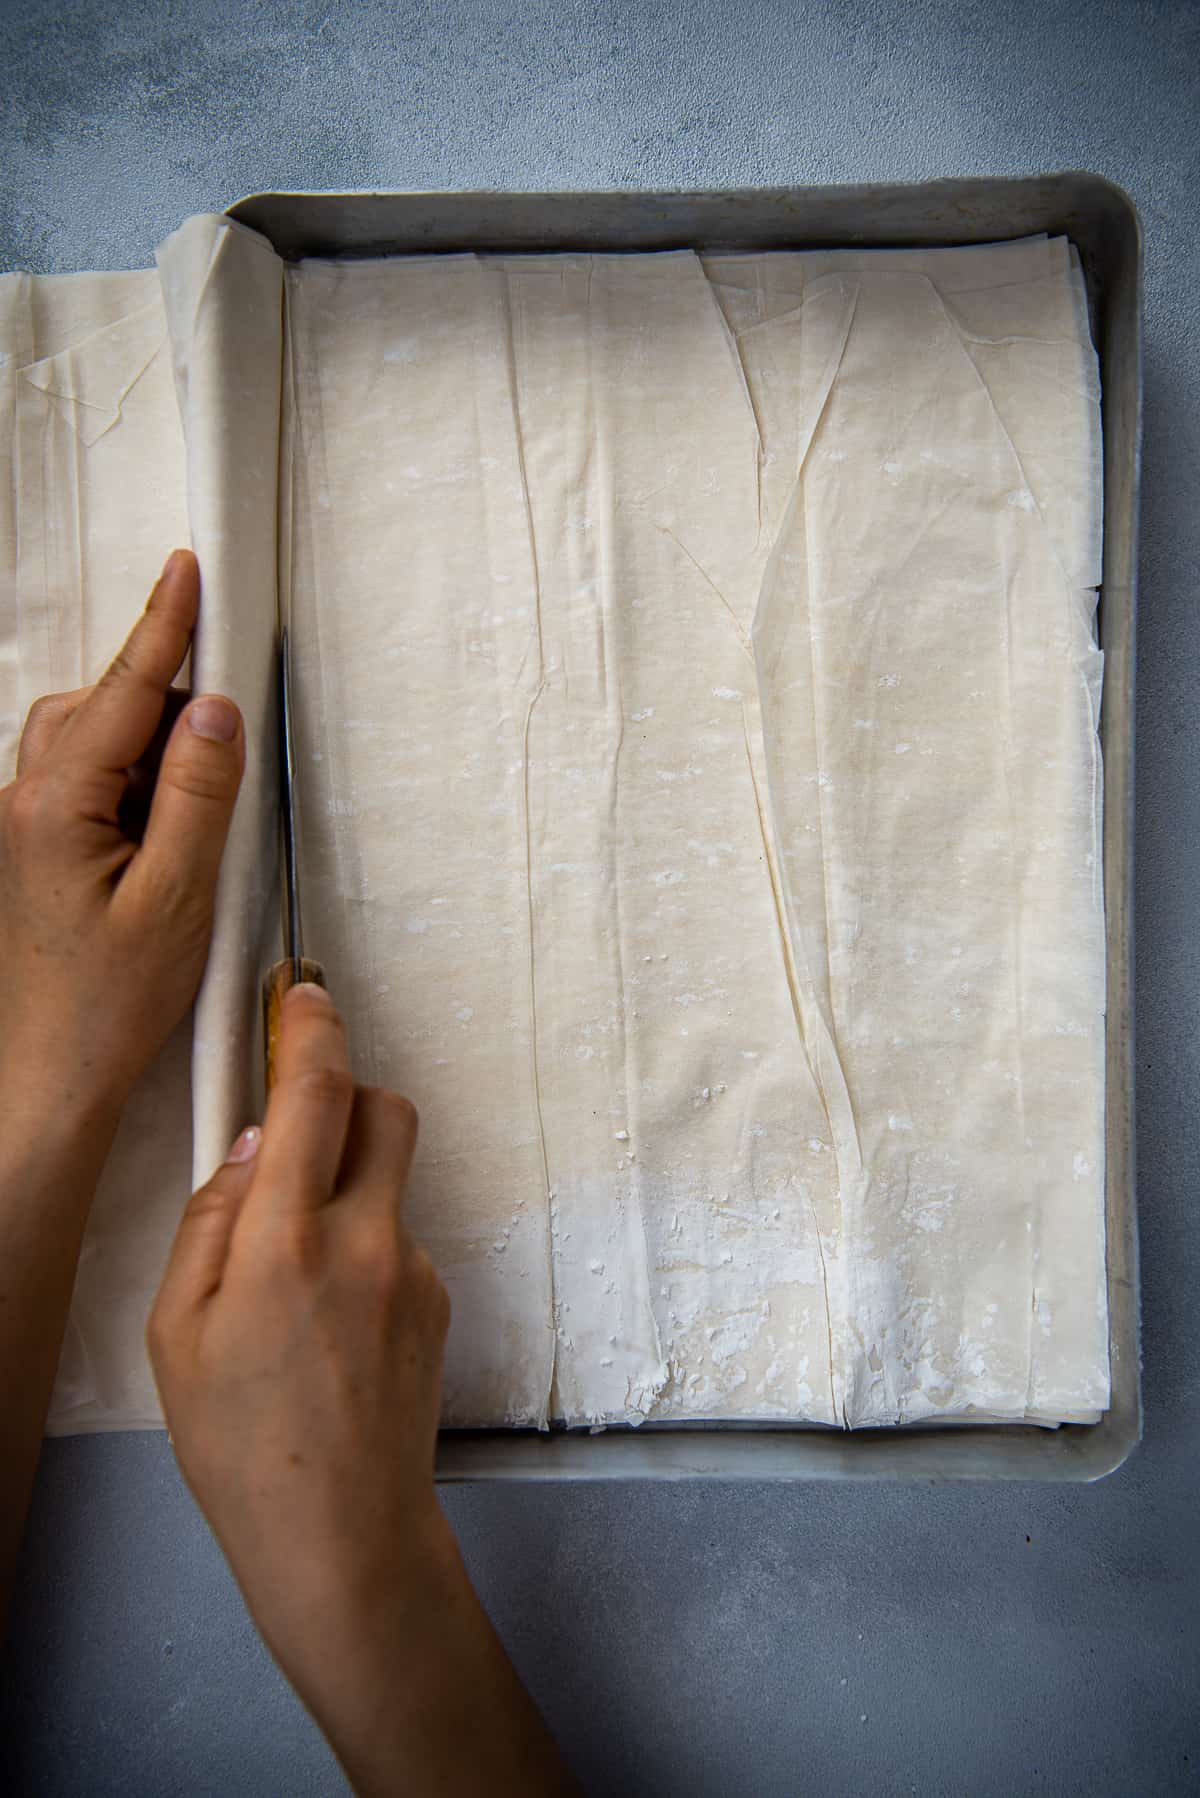 Hands trimming phyllo sheets in a baking pan with a knife.